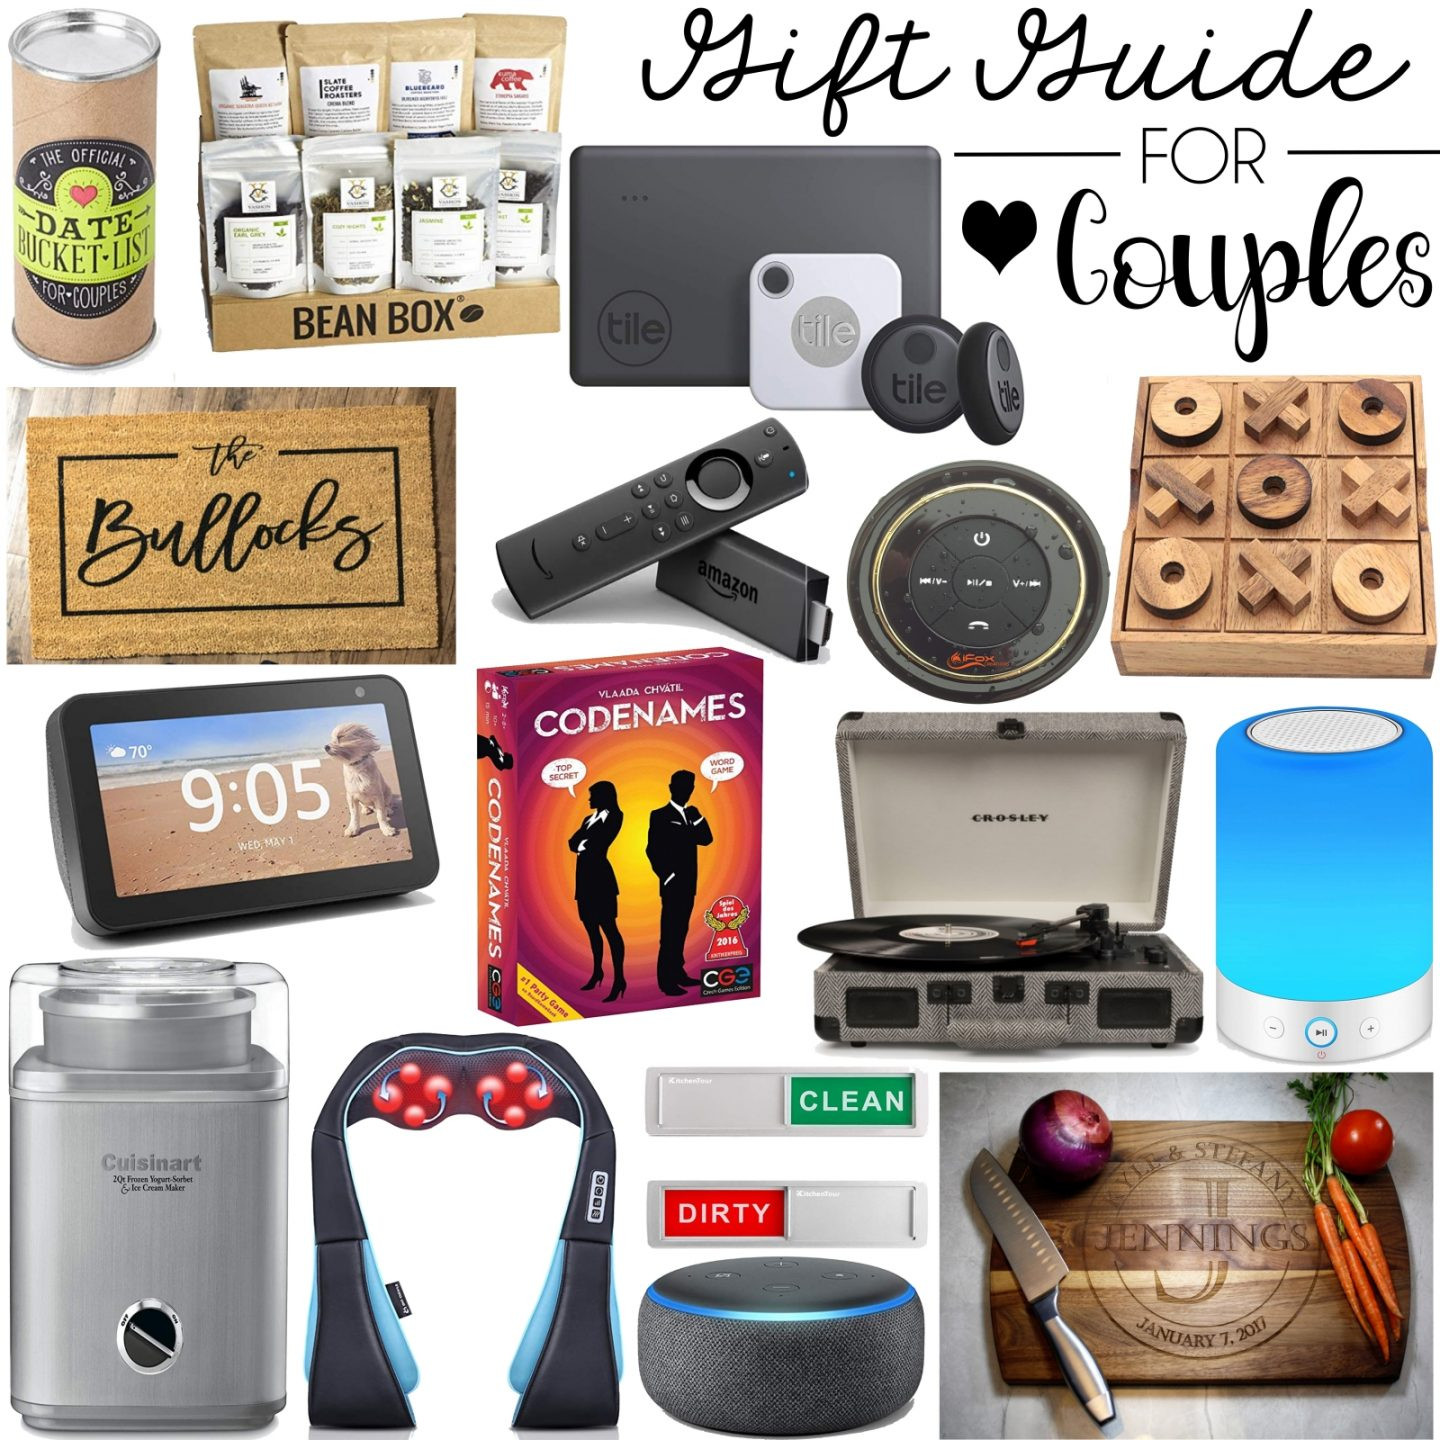 Engagement Gift Ideas For The Couple
 Gift Ideas For Couples The 23 Best Wedding Gifts 2021